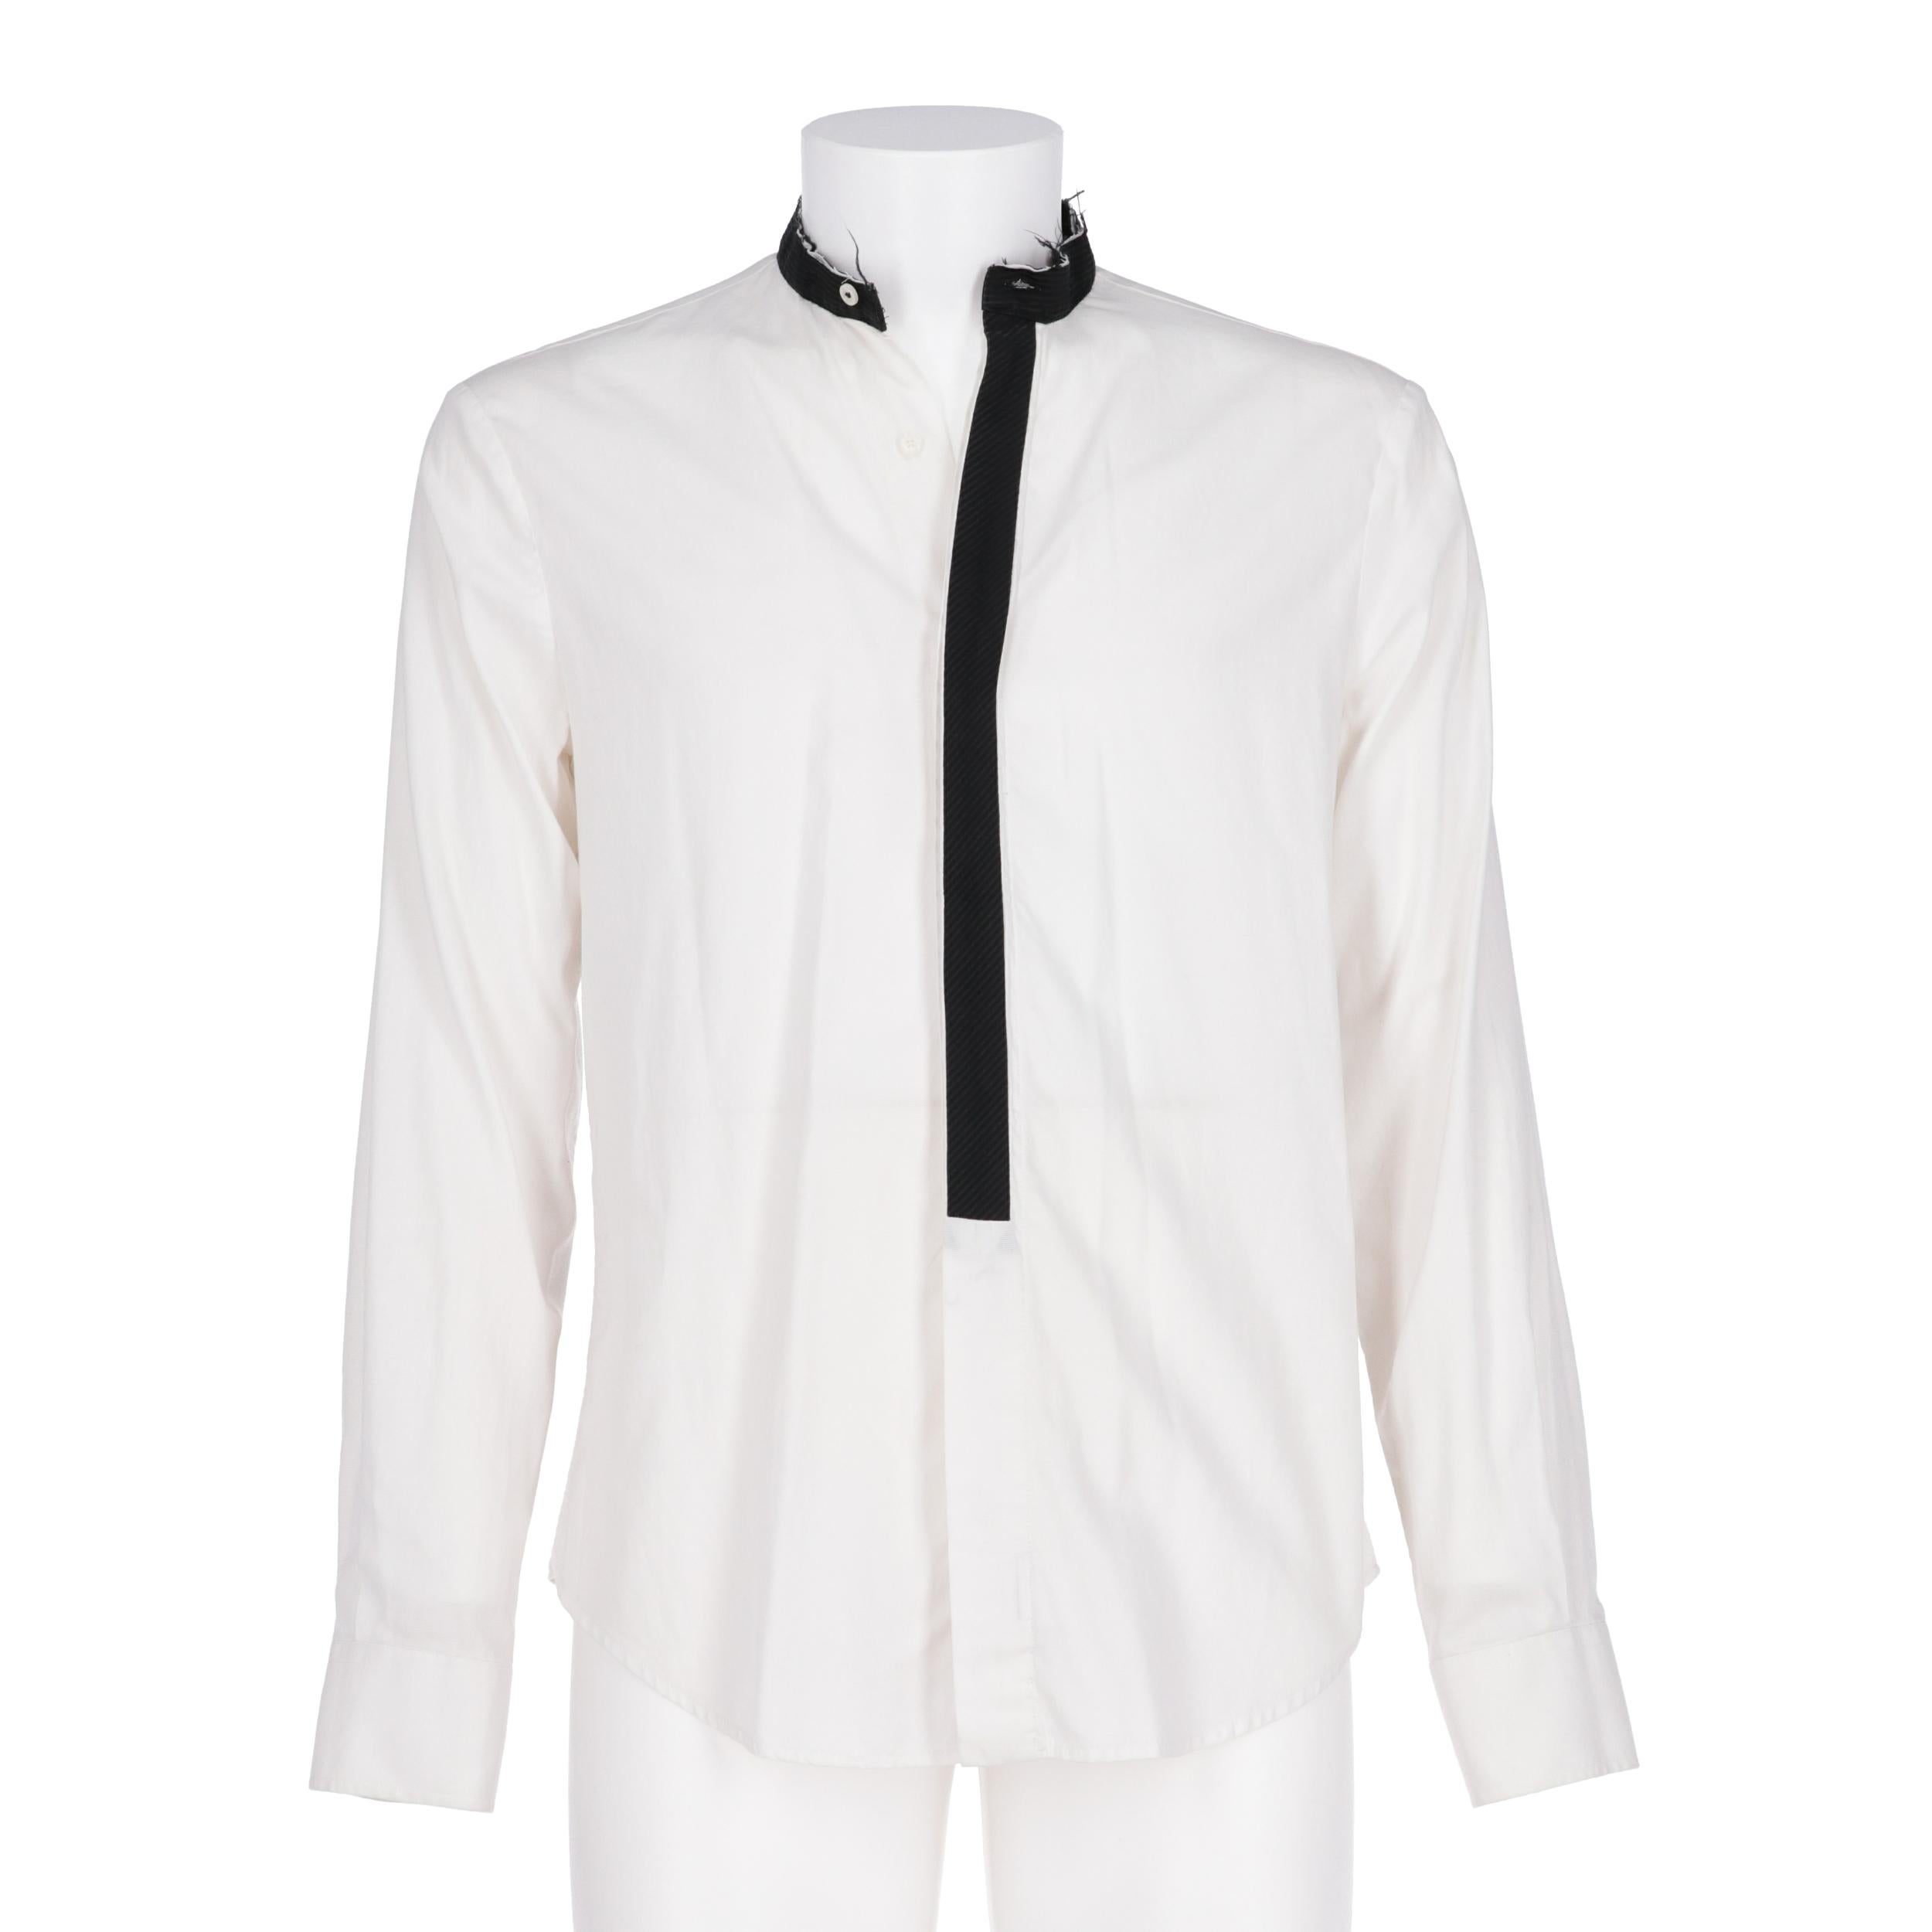 A.N.G.E.L.O. Vintage - ITALY
Just Cavalli white cotton shirt. Raw cut mandarin collar, English fastening with buttons and black wool finishing. Long sleeves and buttoned cuffs.

Years: 2000s

Made in Italy

Size: 48 IT

Flat measurements

Height: 74